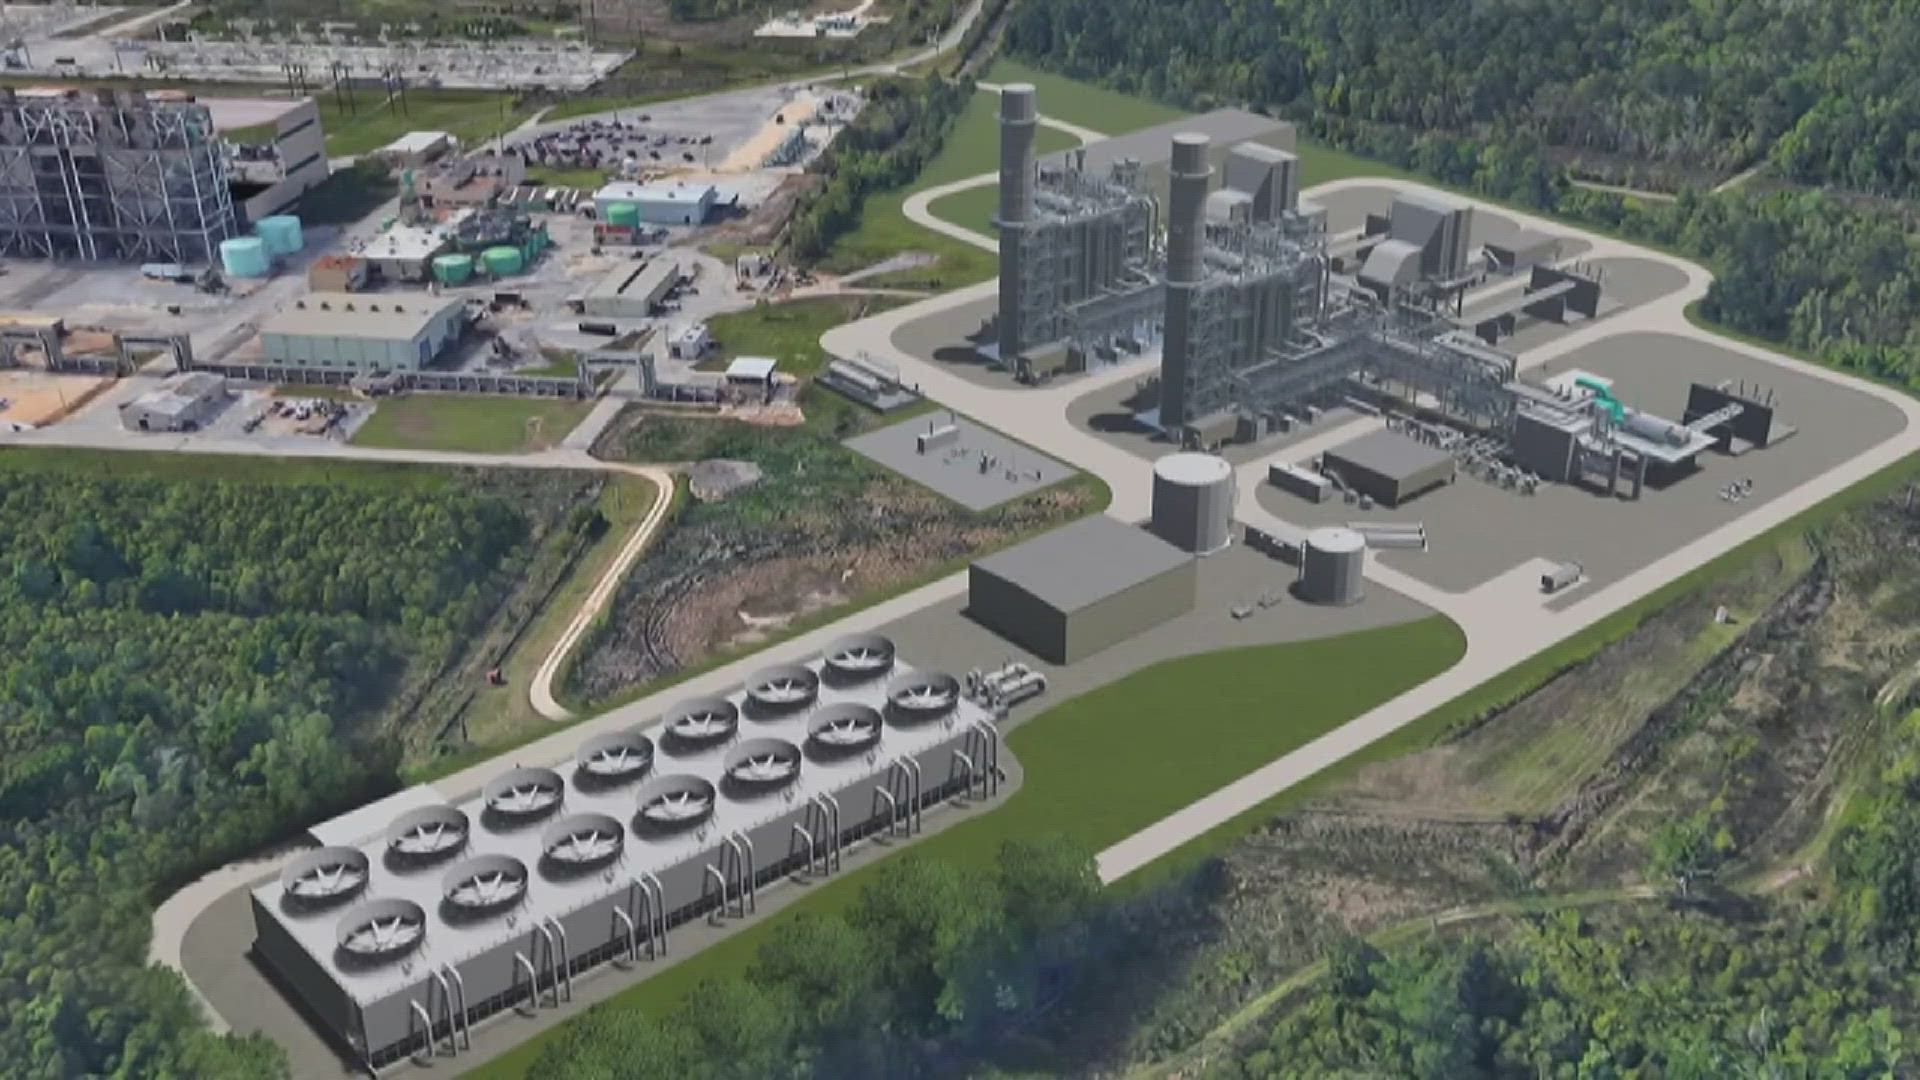 Entergy executives, Gov. Abbott, government officials and community leaders will gather to celebrate the groundbreaking of the Orange County Advanced Power Station.